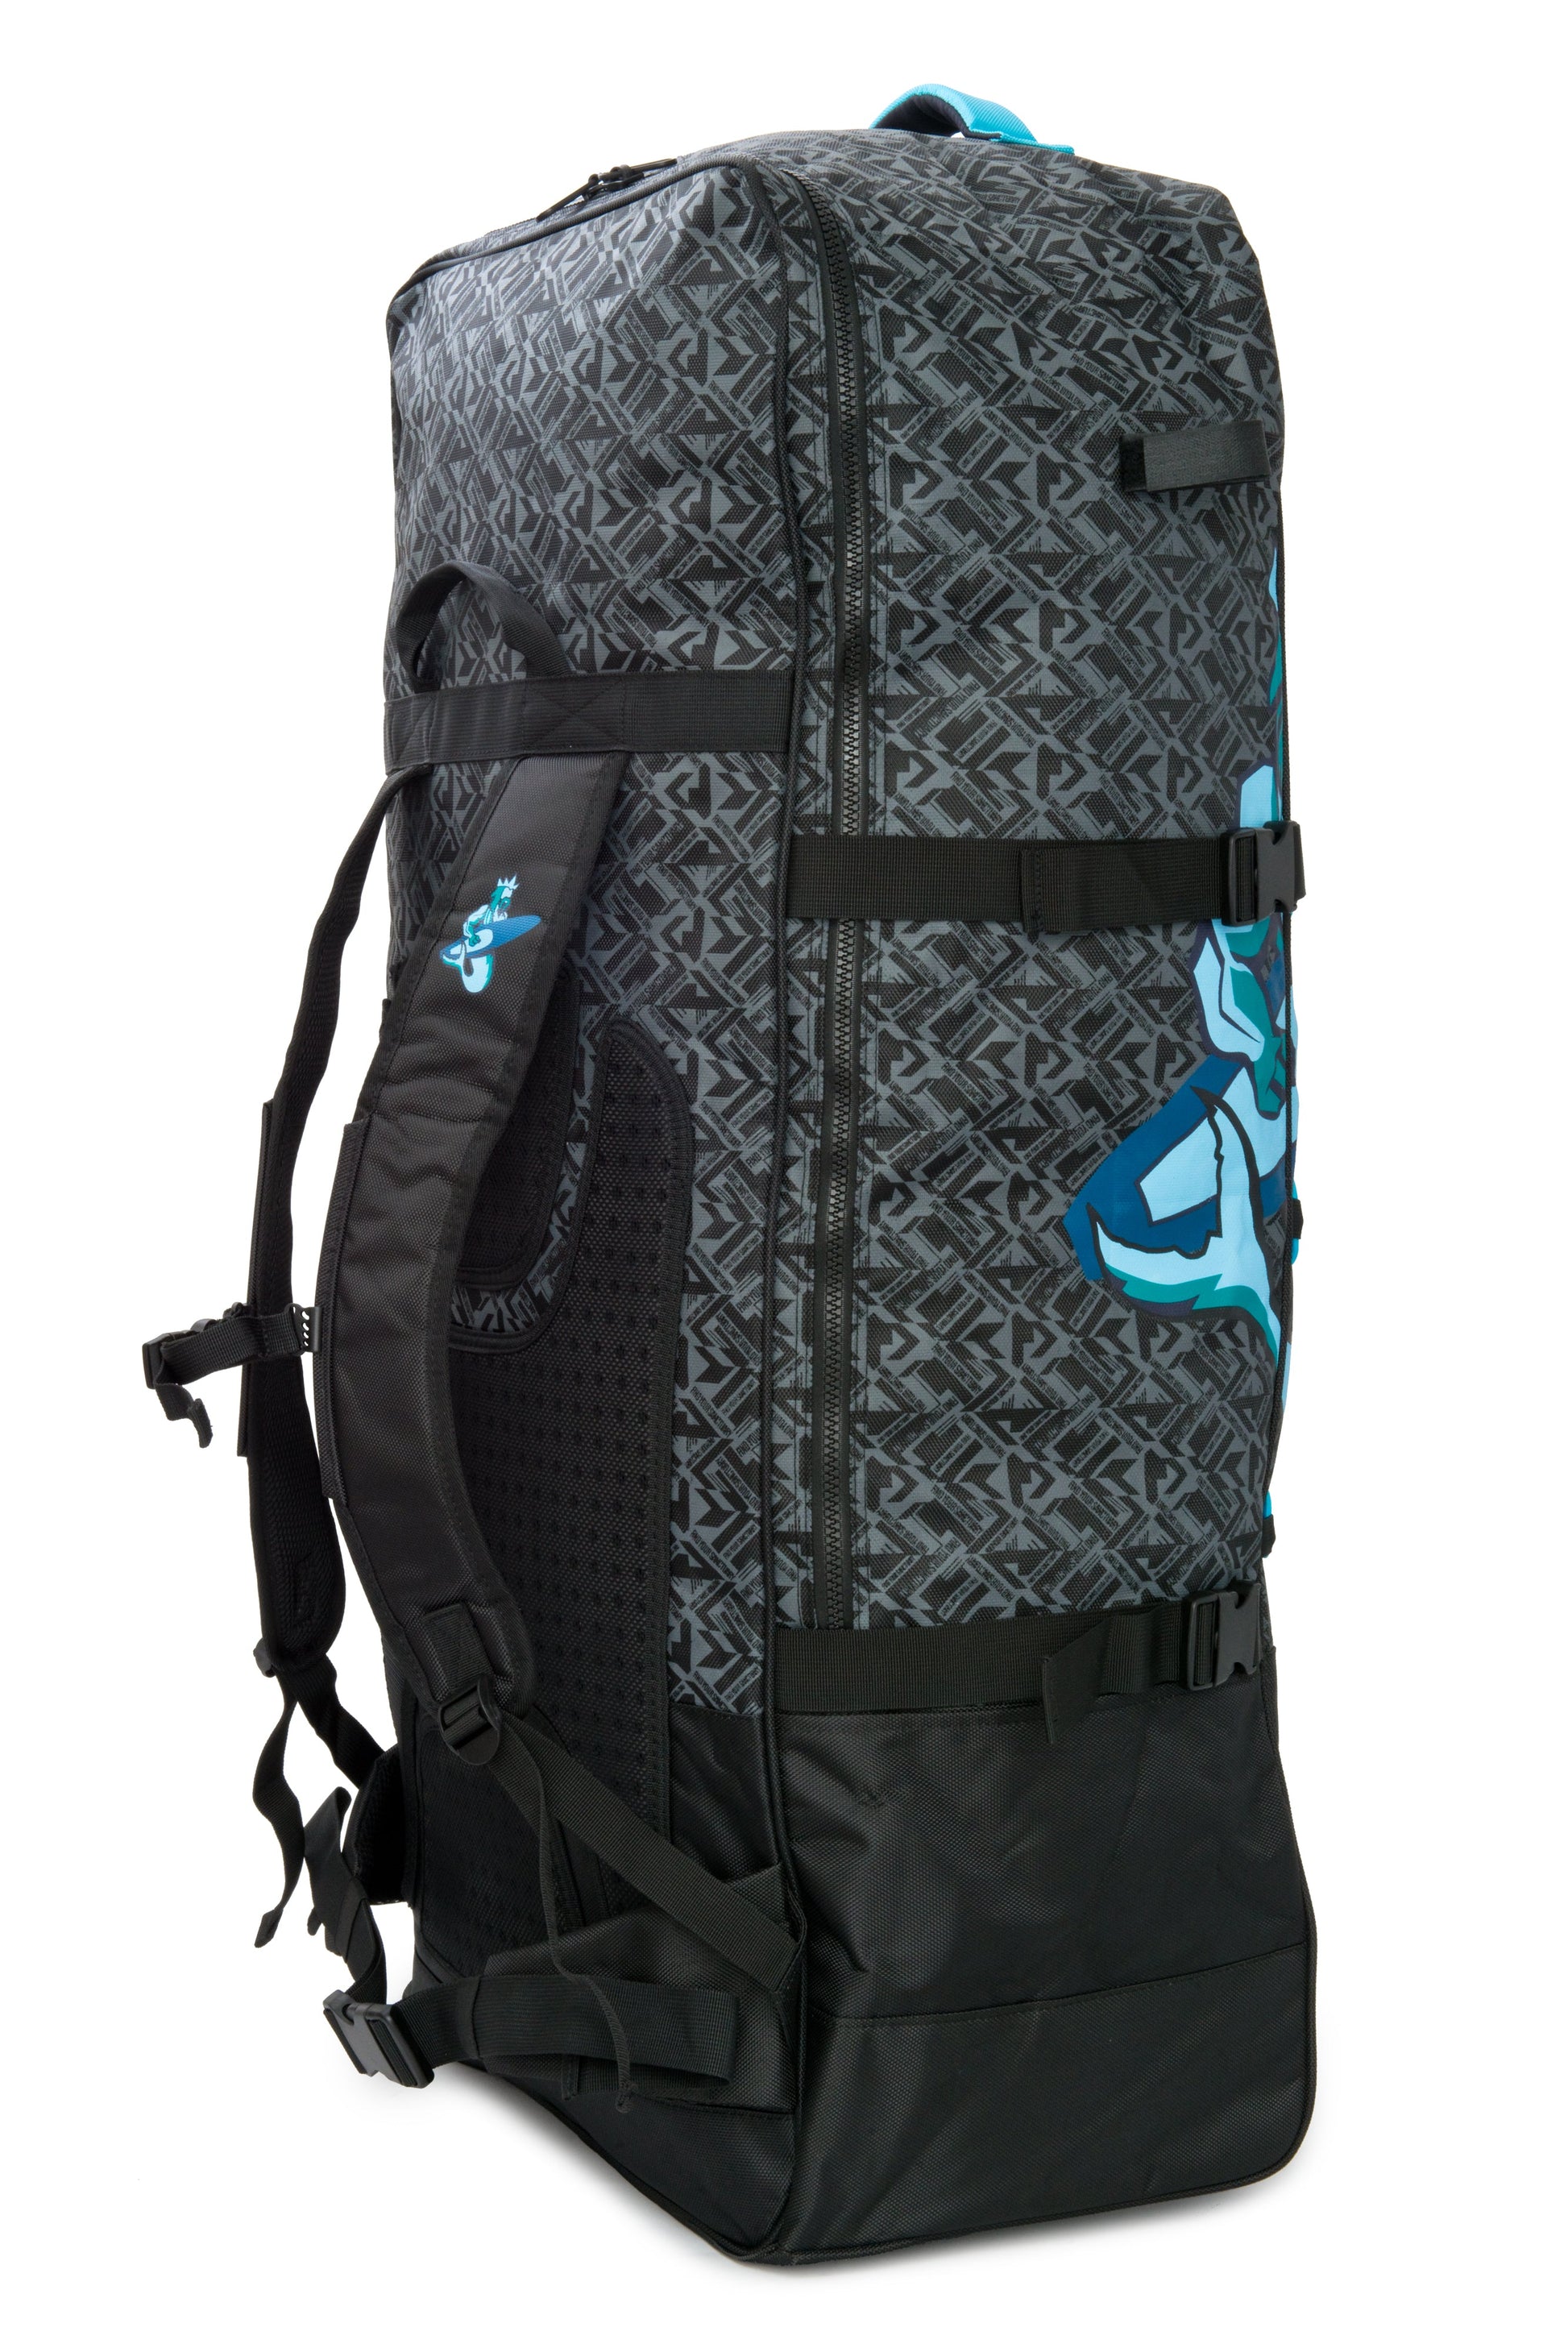 Seagods Stand Up Paddleboards Wheeled carry bag